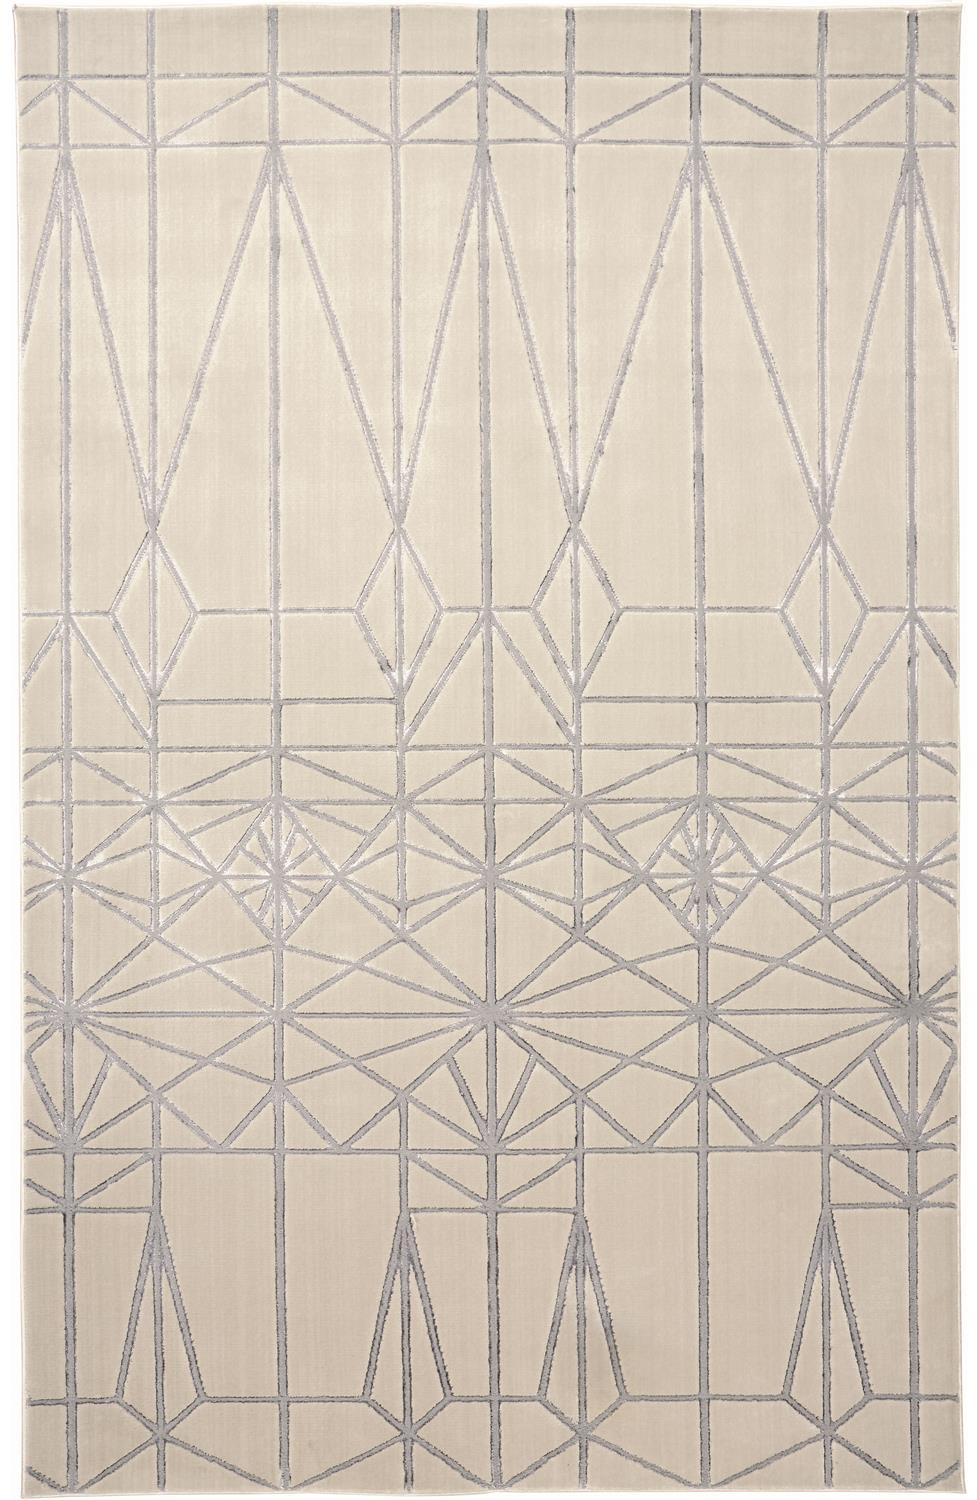 4' X 6' White Silver And Gray Geometric Area Rug-511475-1